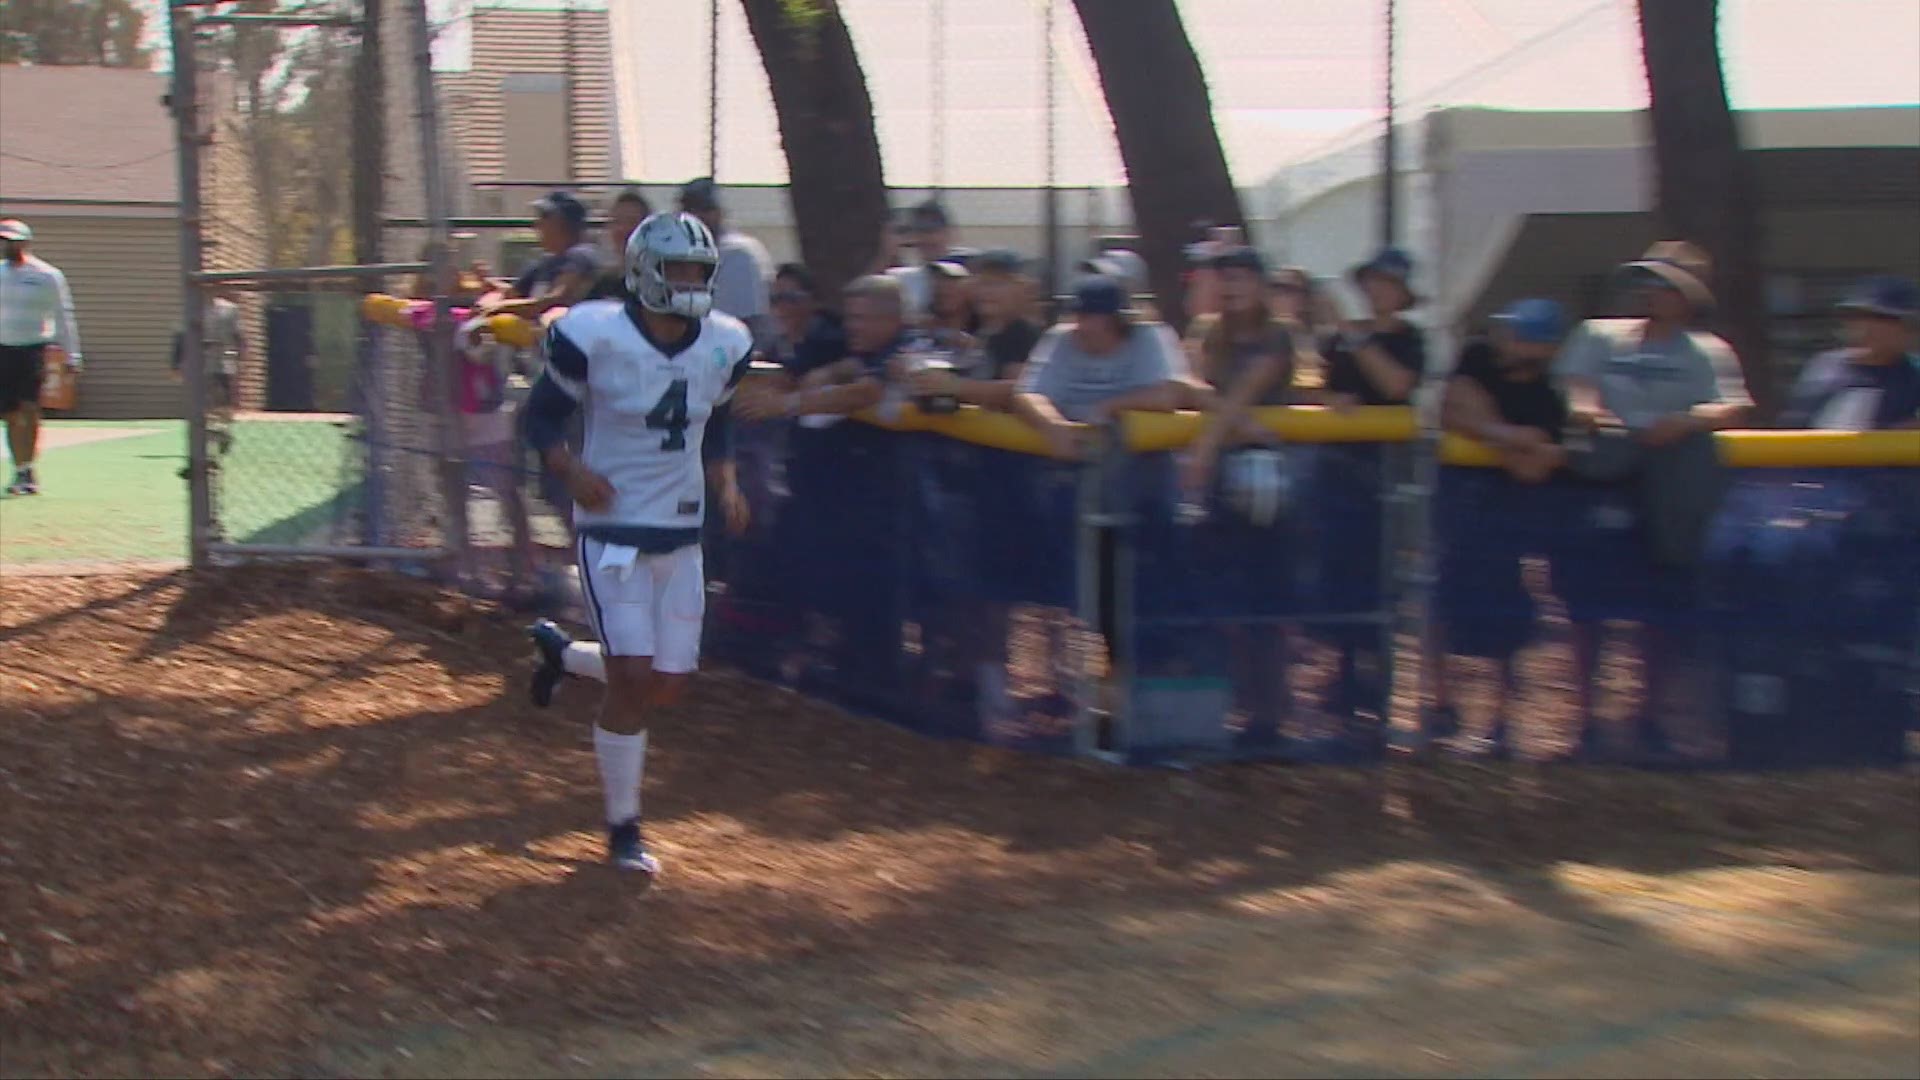 The crowd on hand at training camp sang "Happy Birthday" to Dak Prescott on his way out to the field for practice. WFAA.com